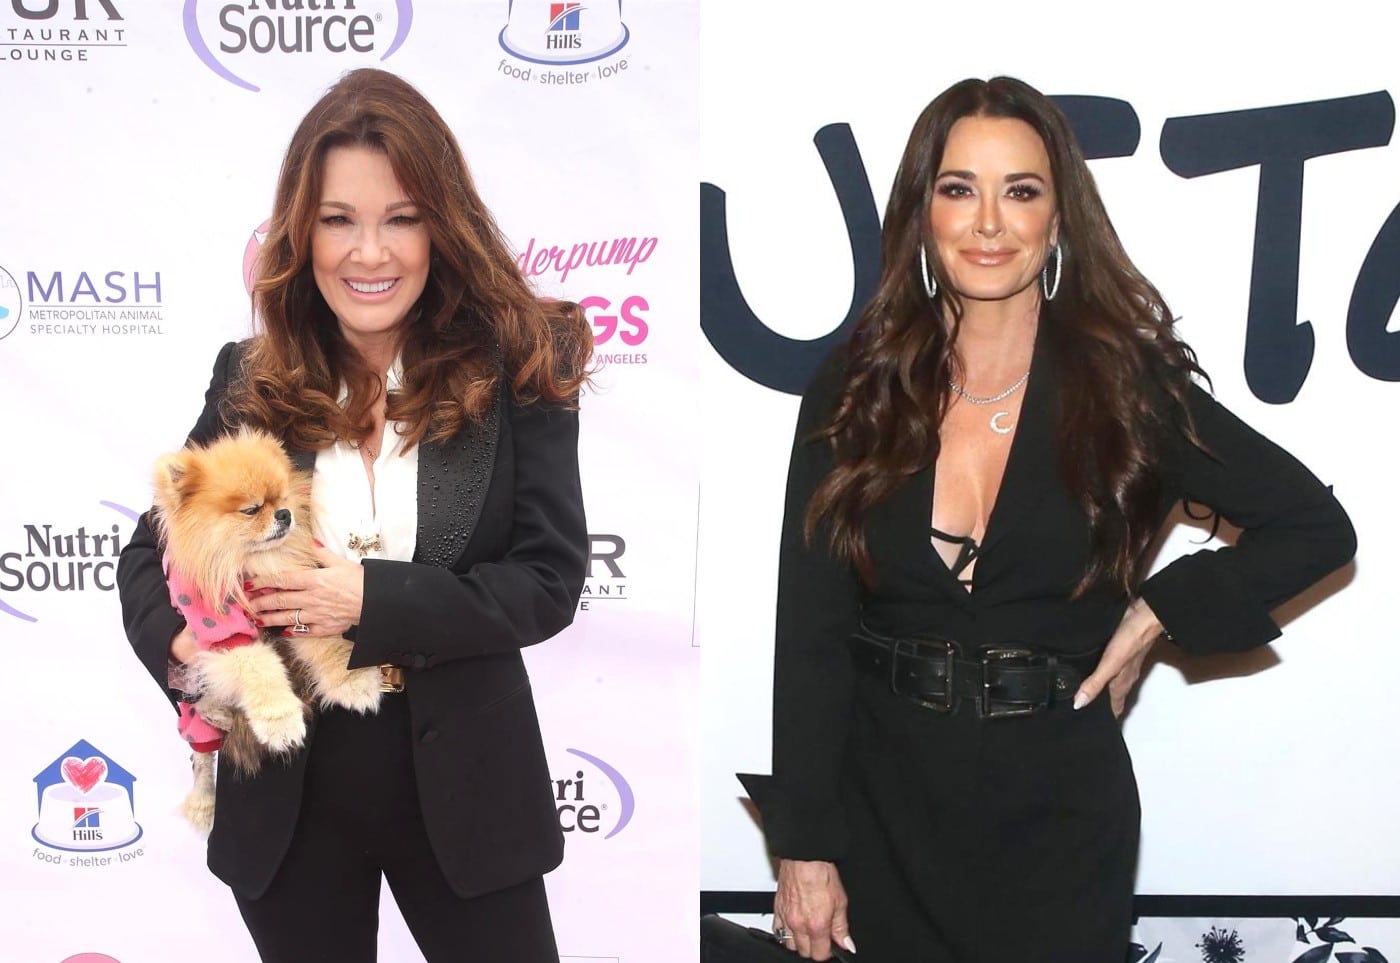 Lisa Vanderpump Claps Back at Kyle Richards "Crafty Diss" as RHOBH Alum Shows Phone to Prove She Sent PK Text Message After Robbery